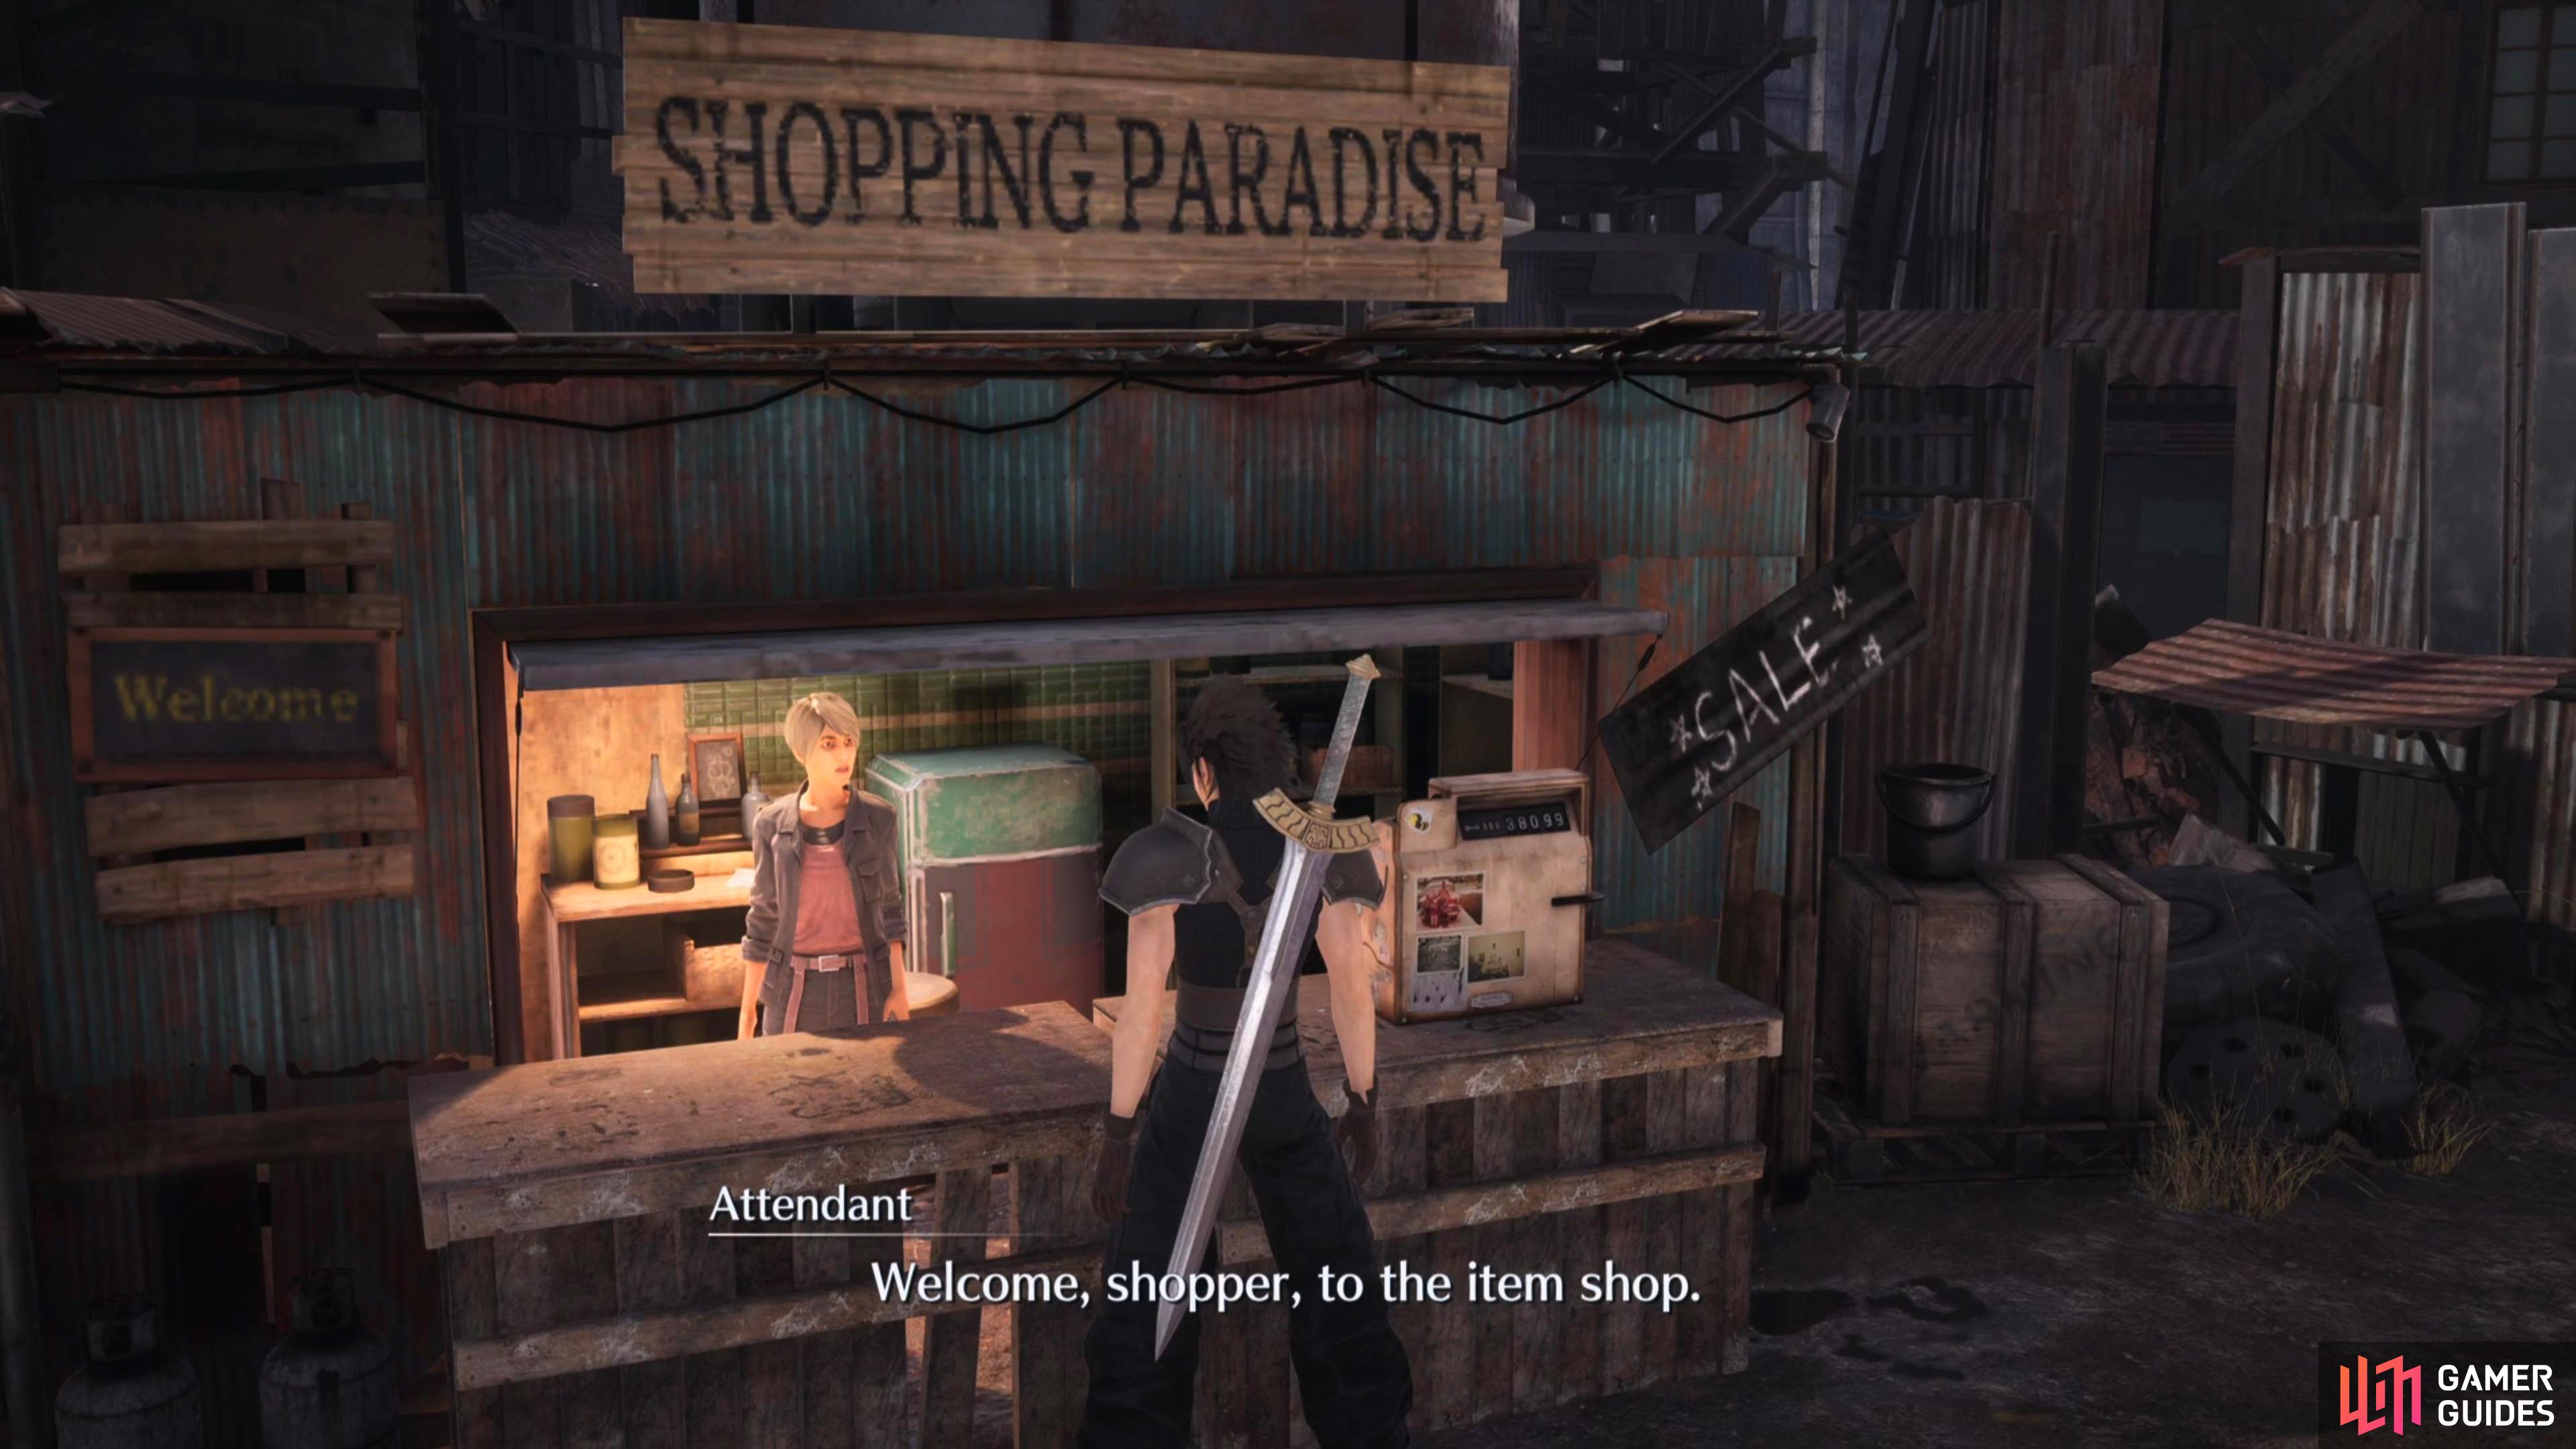 Speak to the "Shopping Paradise" attendant for another +10 affection to Aerith.